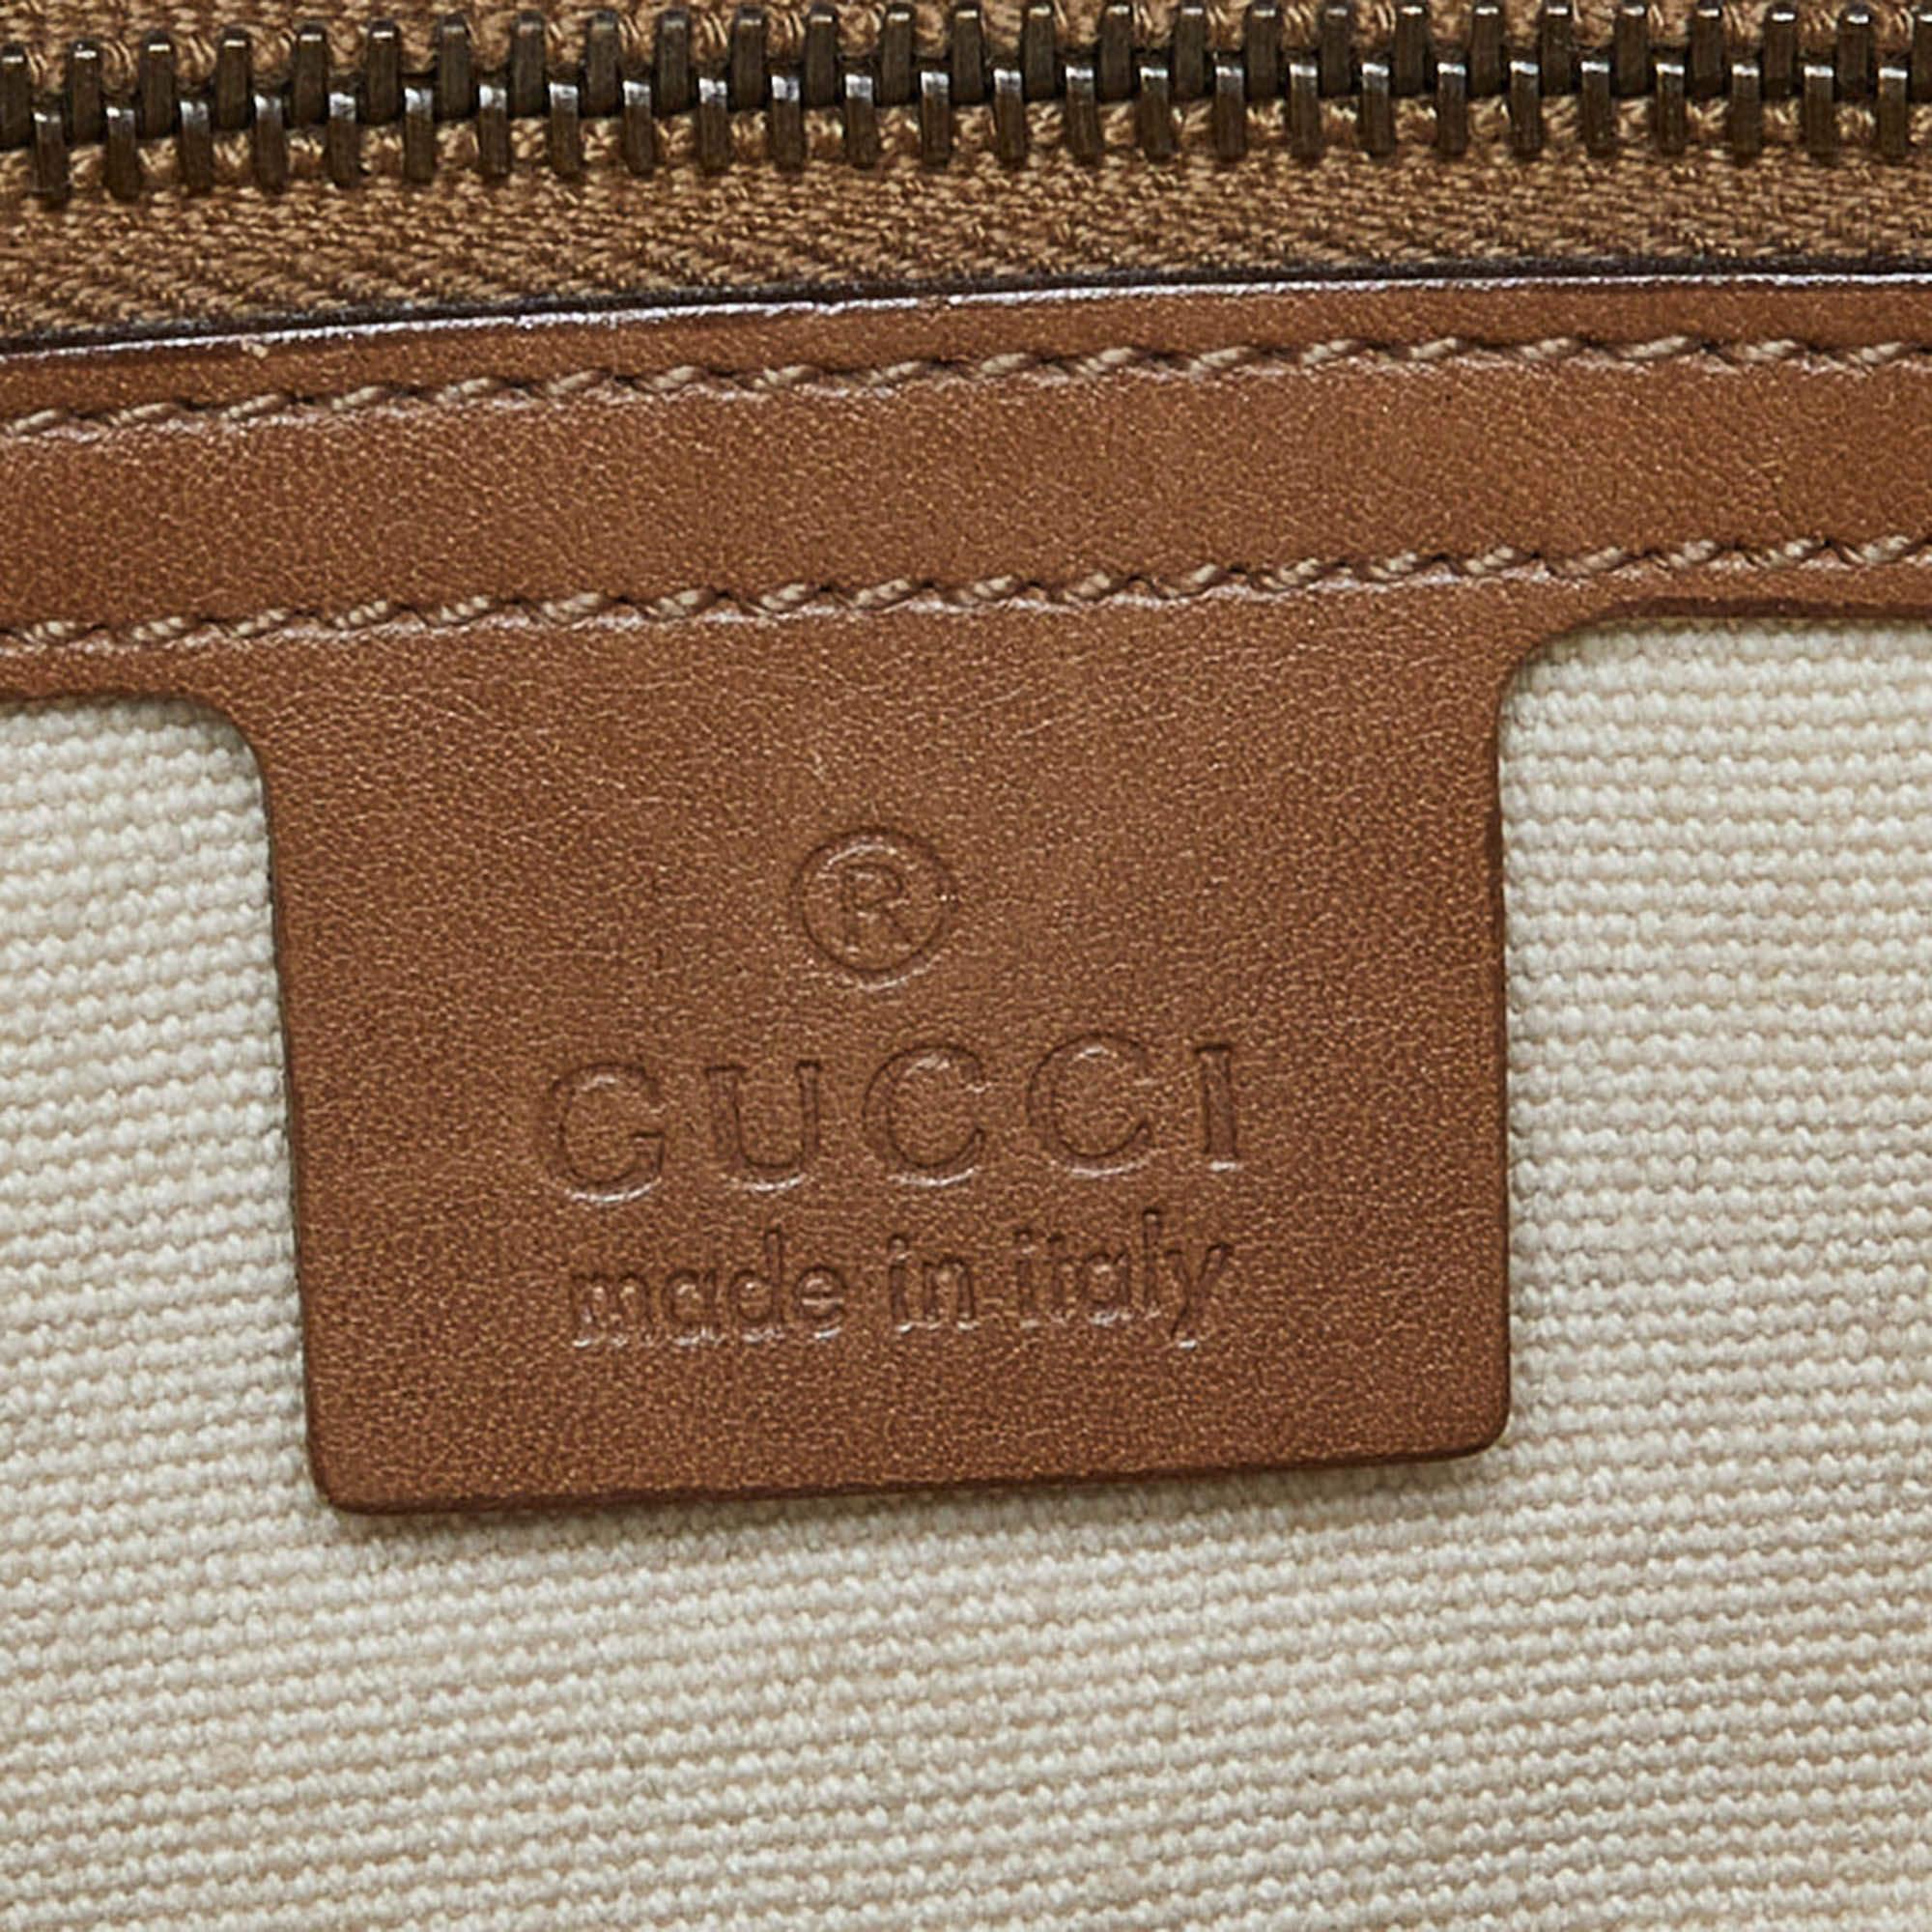 Gucci Cream/Brown Canvas and Leather Bamboo Top Handle Bag 2